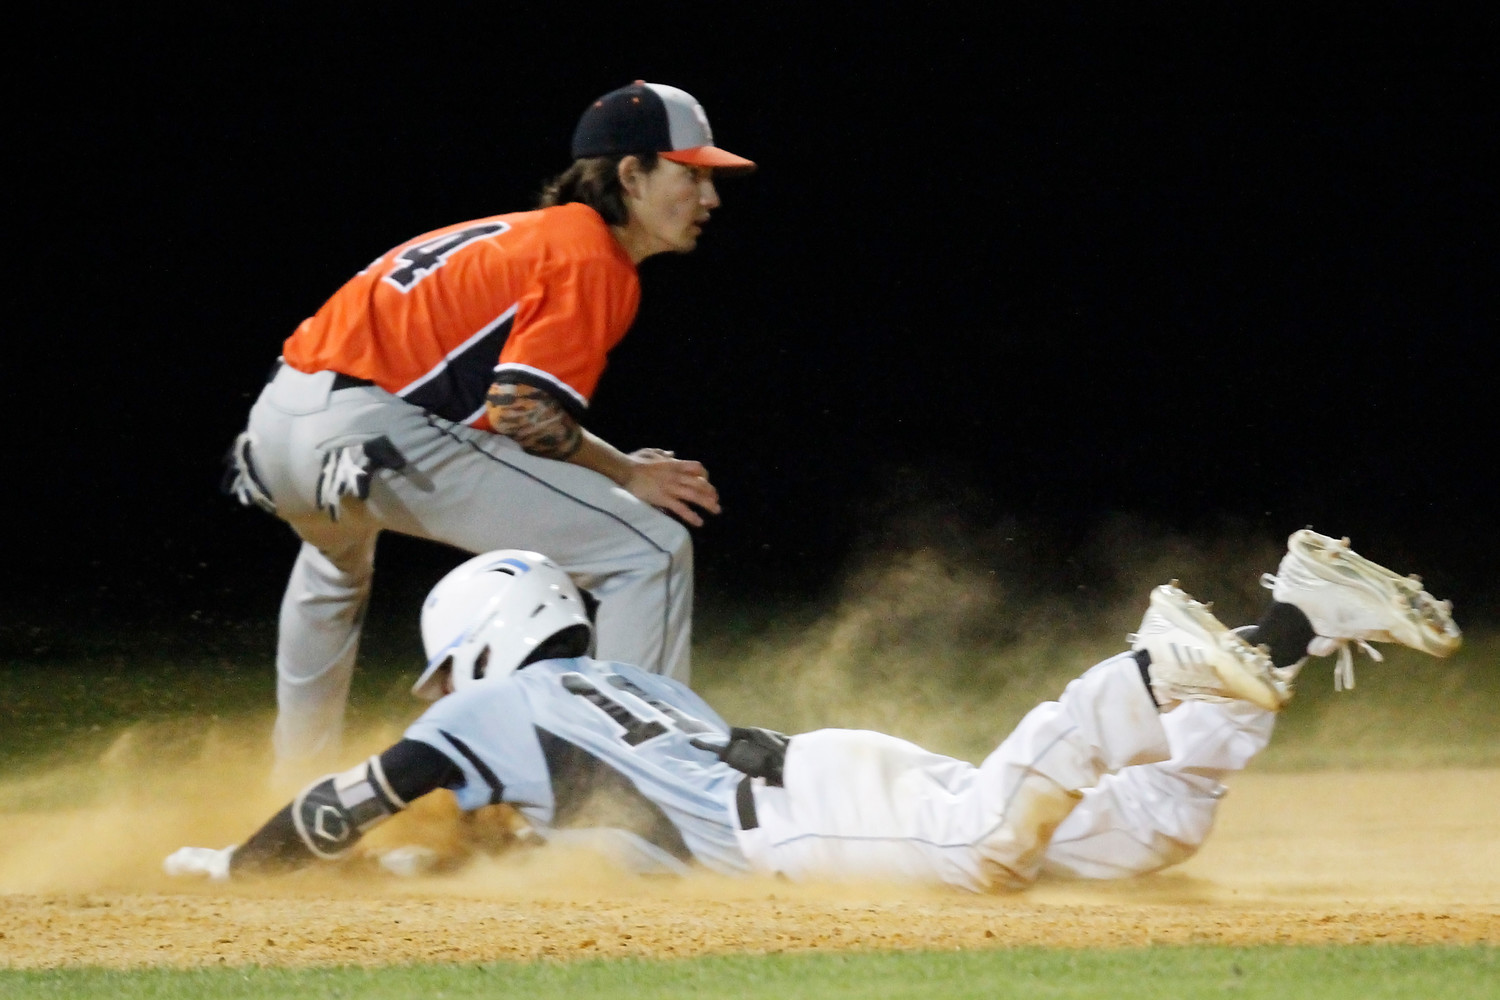 Ponte Vedra’s Jacob Young (11) slides safely into third in a cloud of dust against Orange Park.